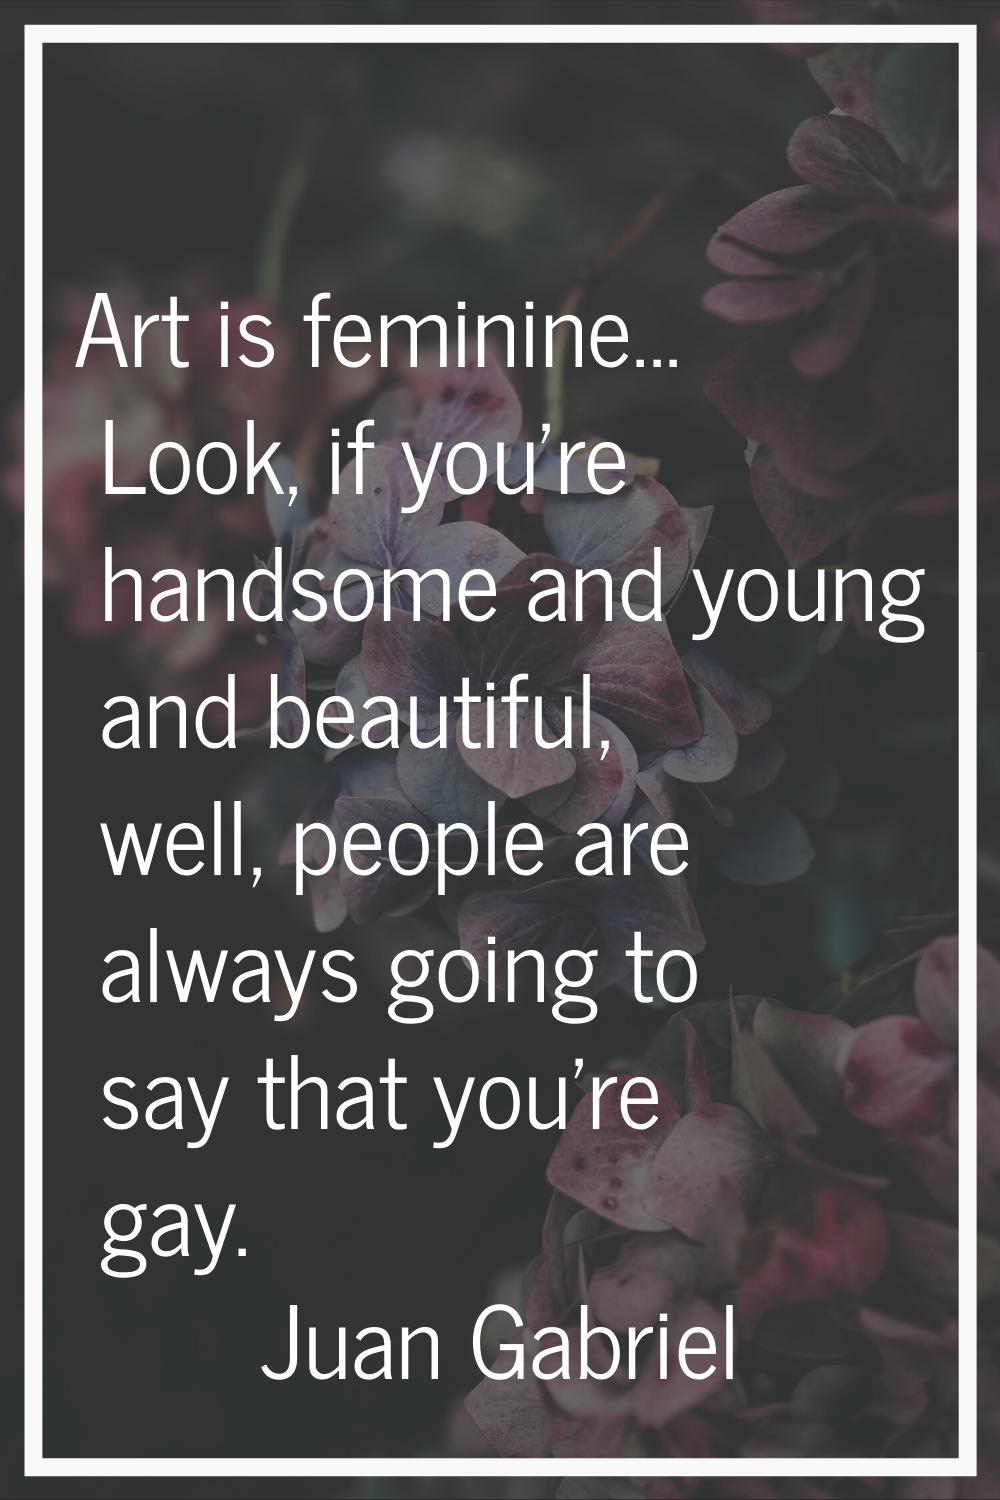 Art is feminine... Look, if you're handsome and young and beautiful, well, people are always going 